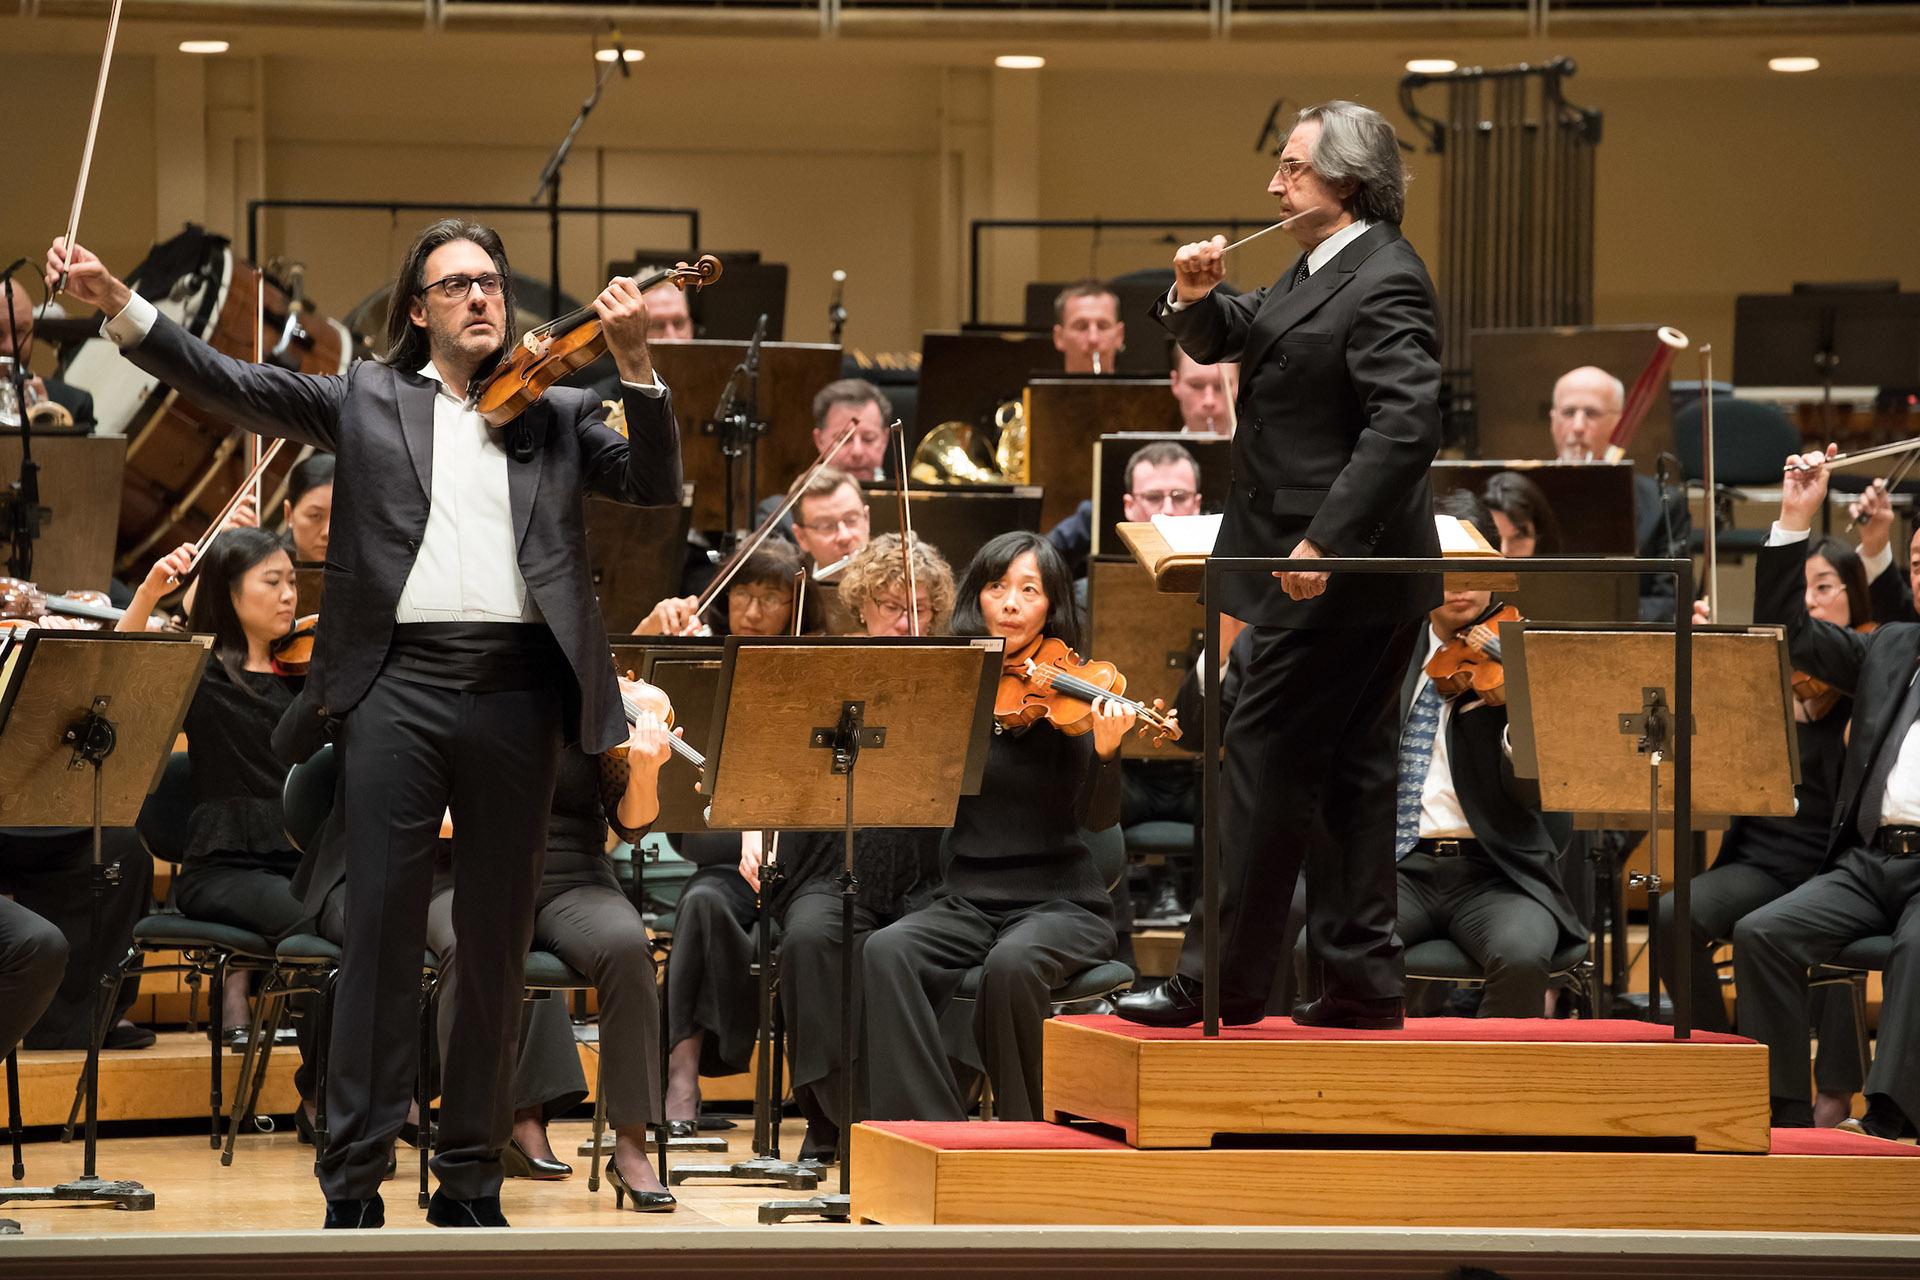 The Chicago Symphony Orchestra conducted by Maestro Riccardo Muti performs with violin soloist Leonidas Kavakos. ©2019 Anne Ryan